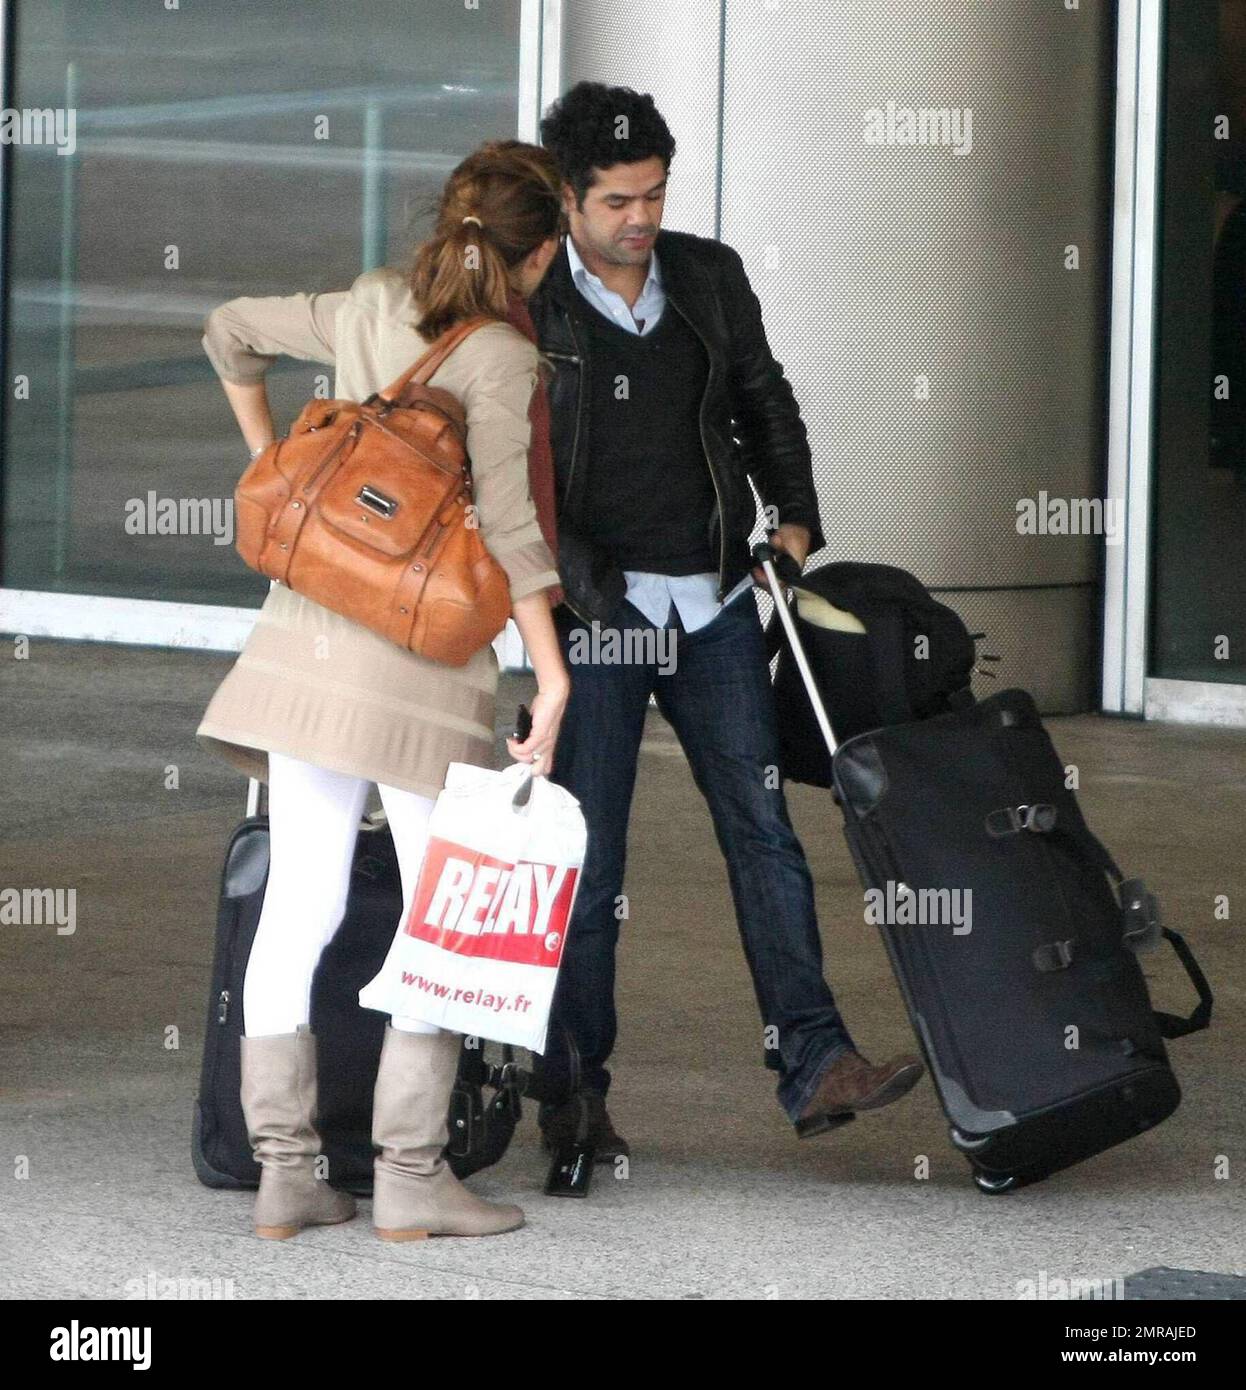 Exclusive!! French actor Jamel Debbouze and wife Melissa Theuriau arrive at Miami airport. The actor stopped to sign an autograph for a fan before jumping in a cab. Miami Beach, Florida. 2/23/09 Stock Photo